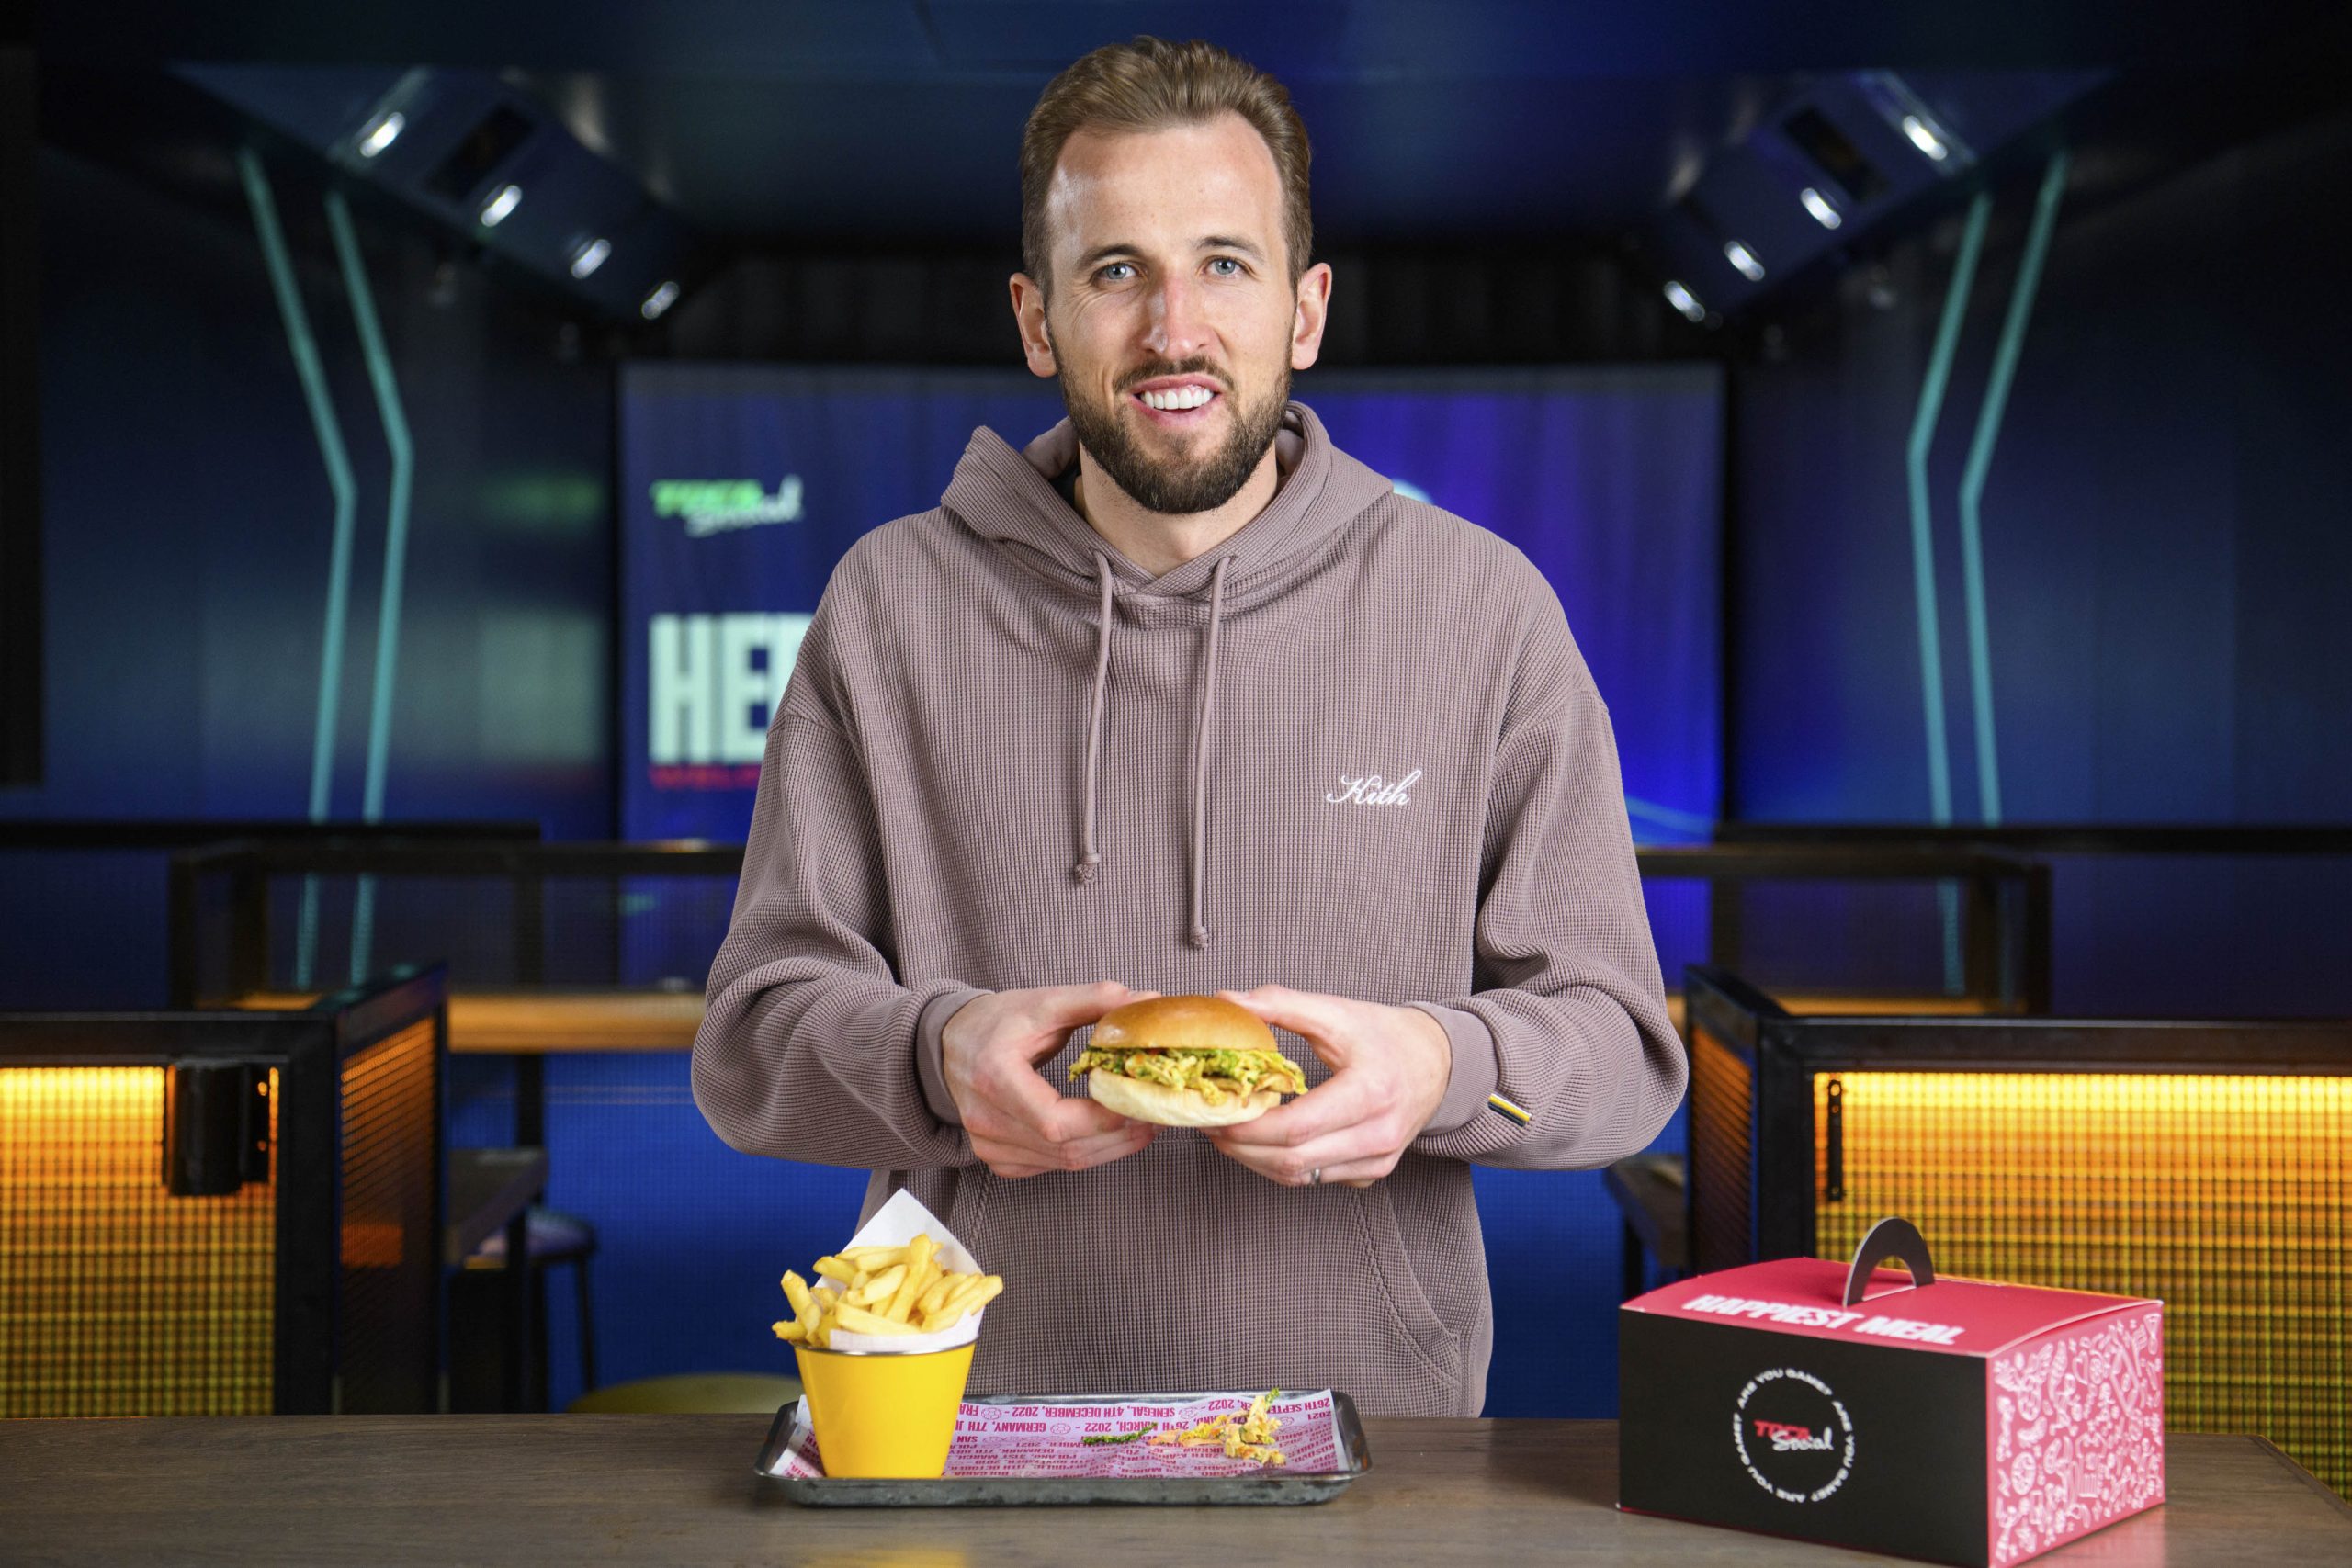 Harry Kane and his new burger The Record Breaker